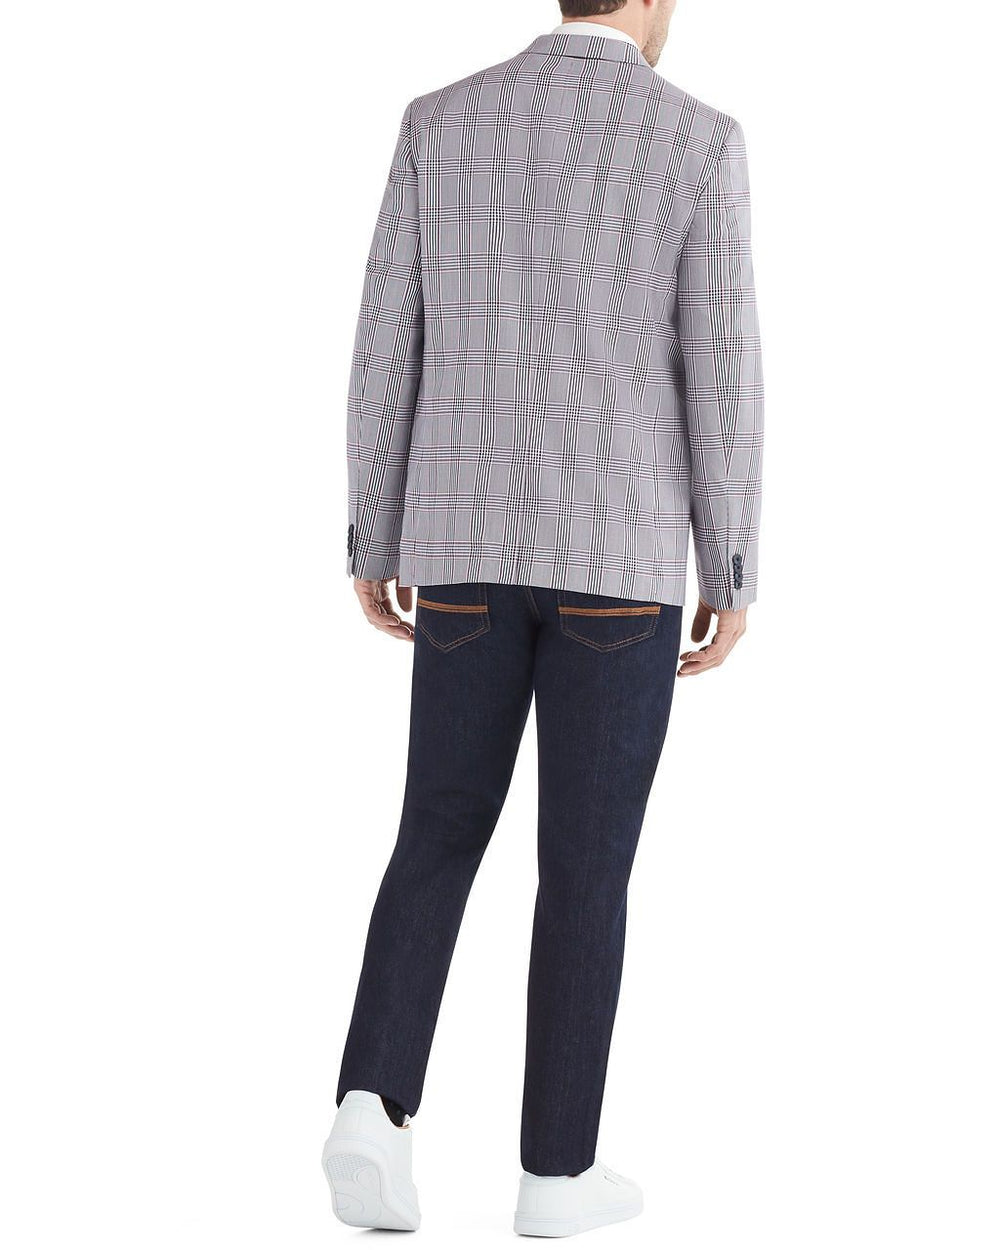 Crown Plaid Check Sportcoat Jacket - Blue and White